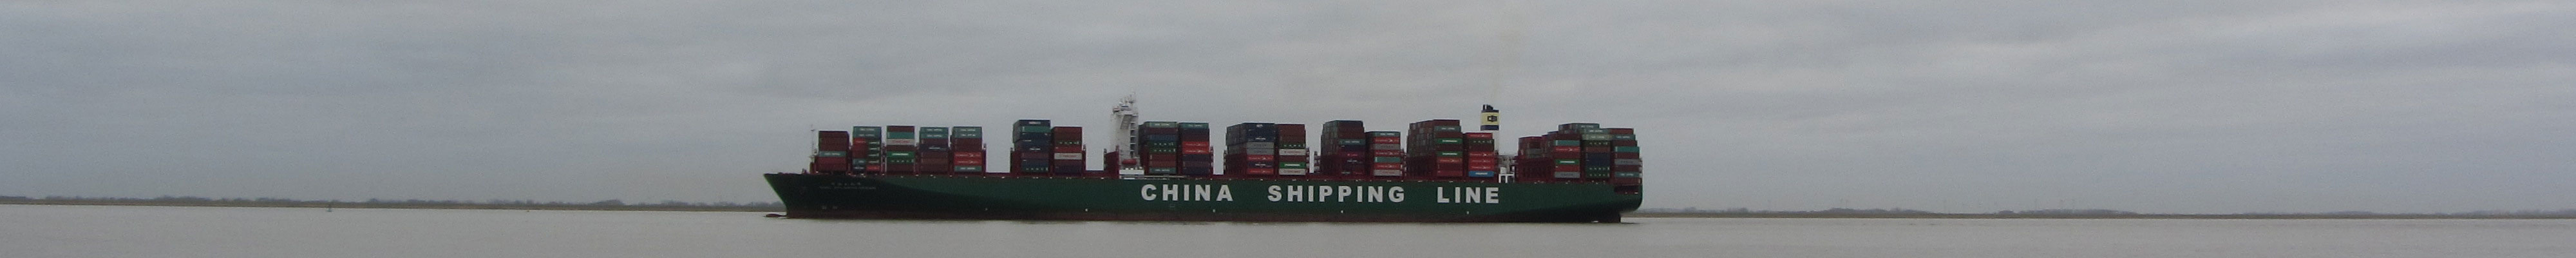 Cina Shipping Line, 300m lang, 18.000  Container